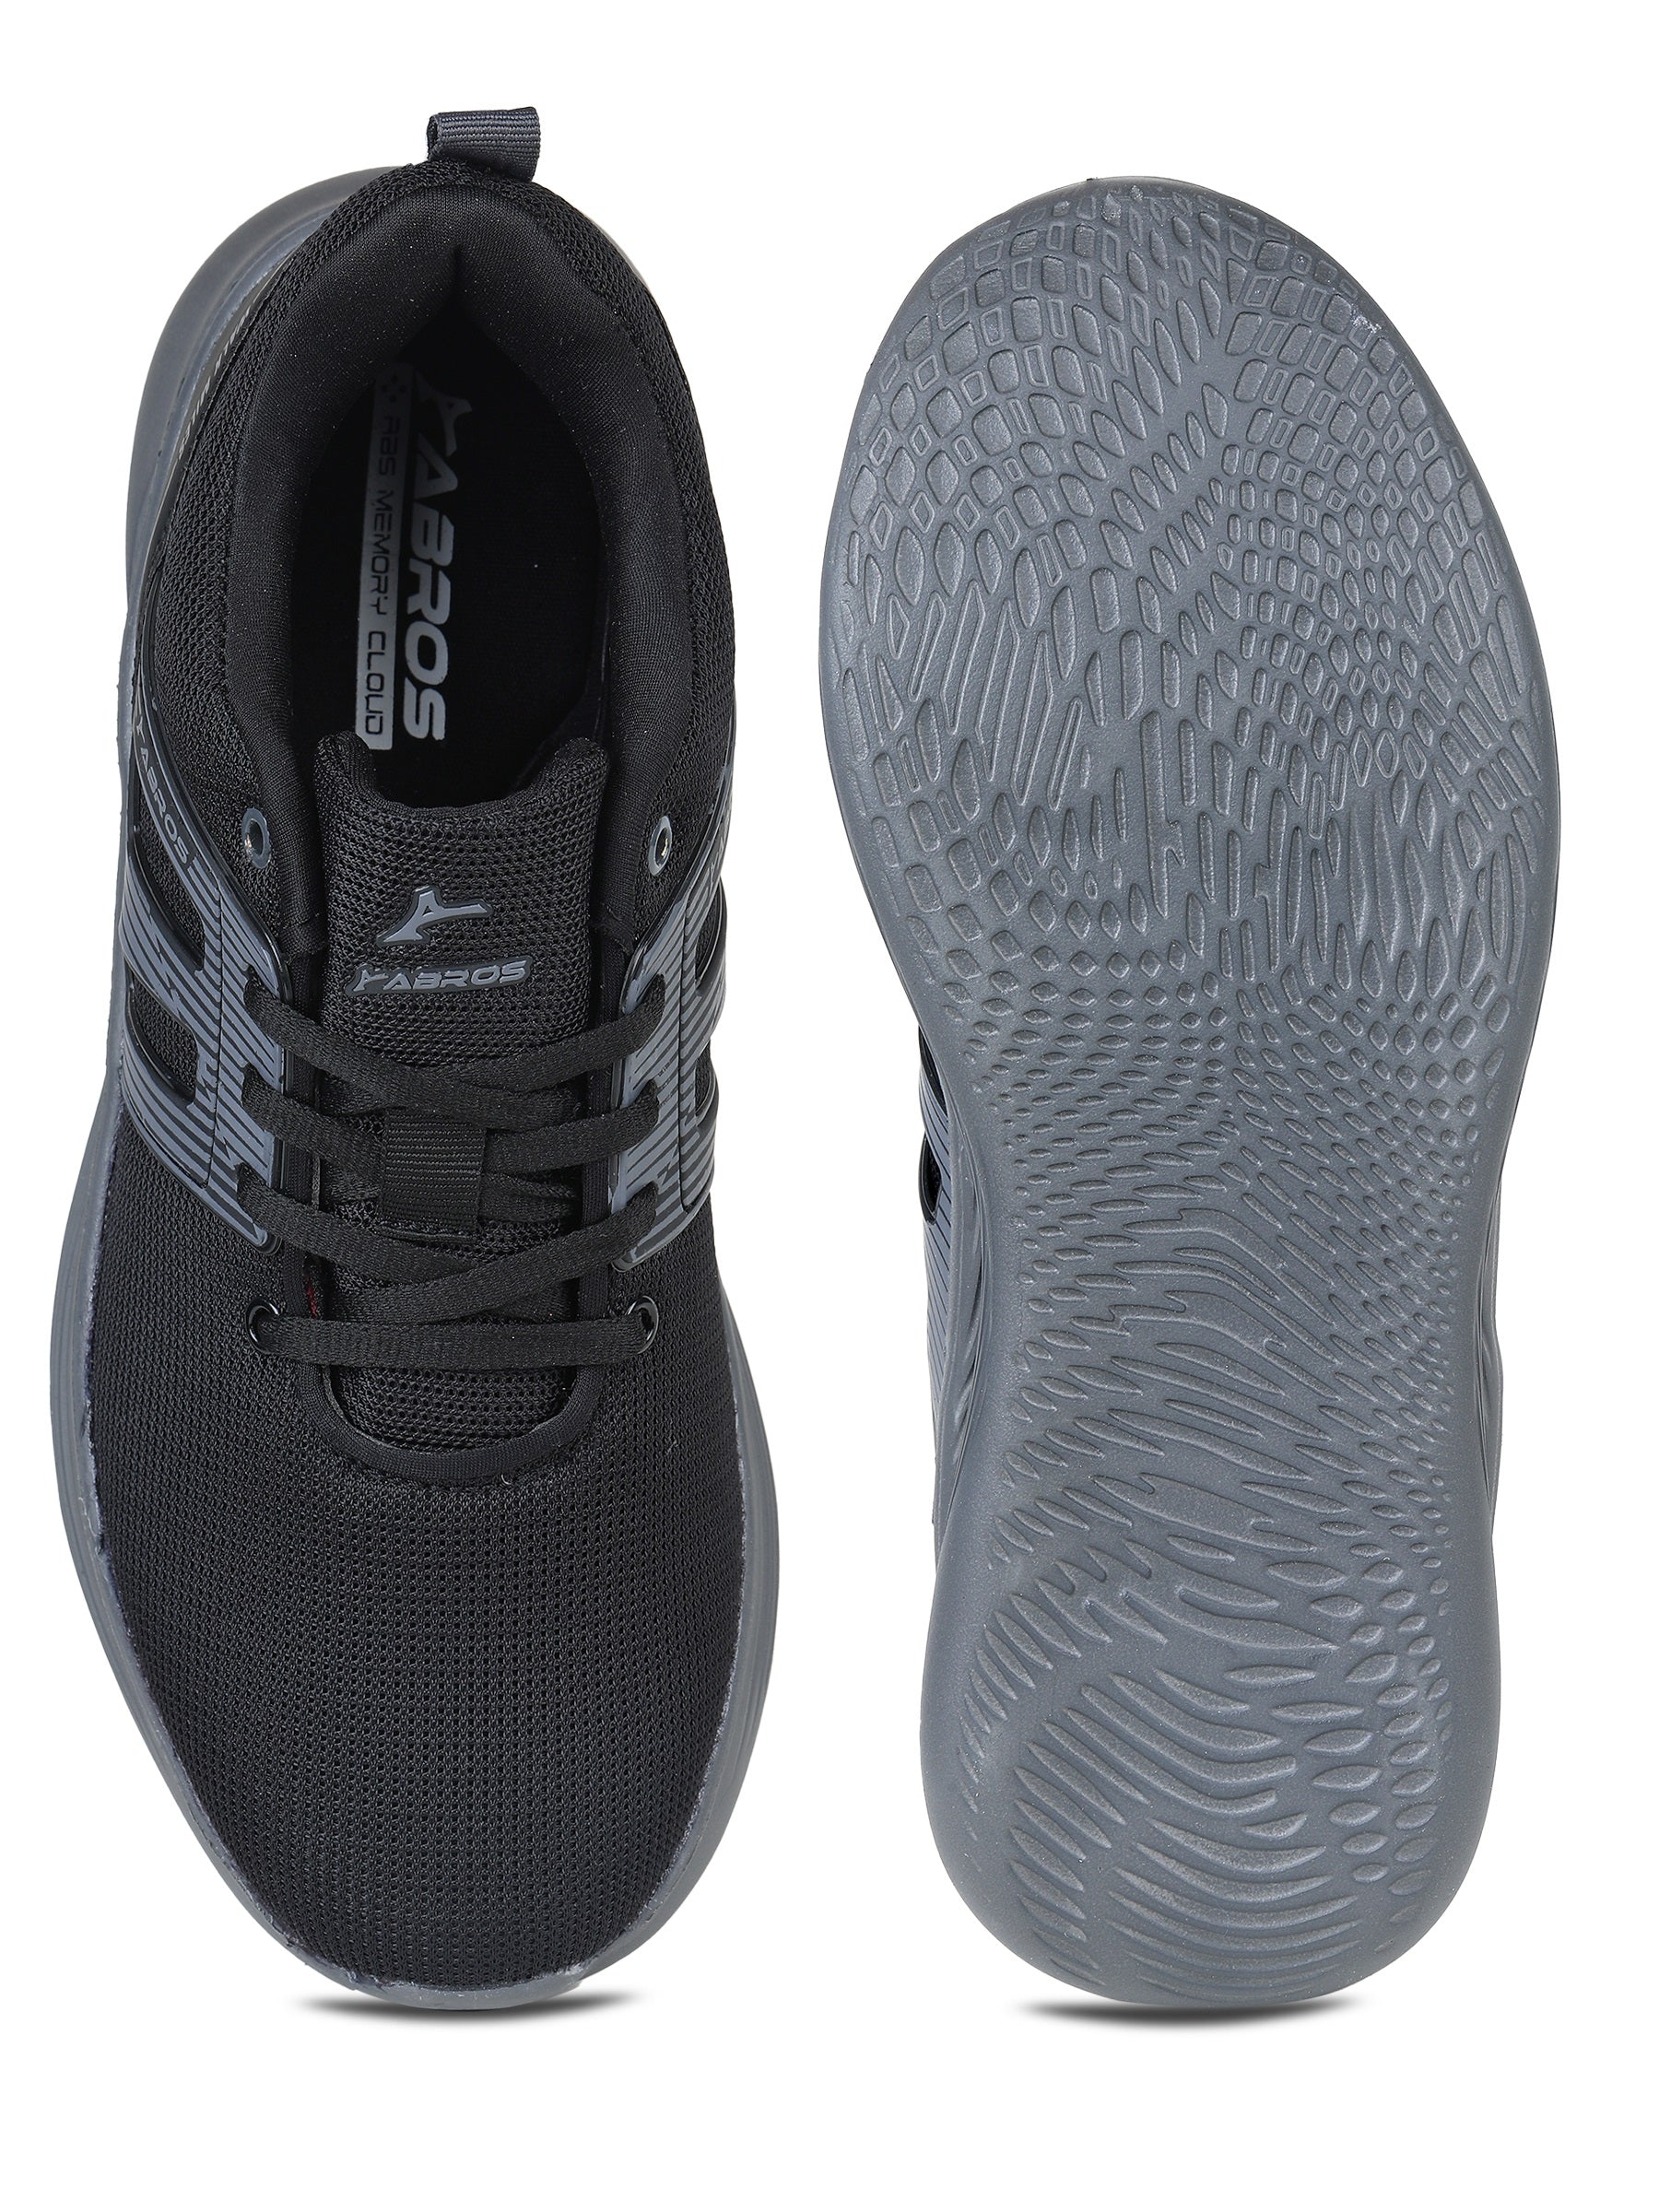 LINUX RUNNING SPORTS SHOES FOR MEN